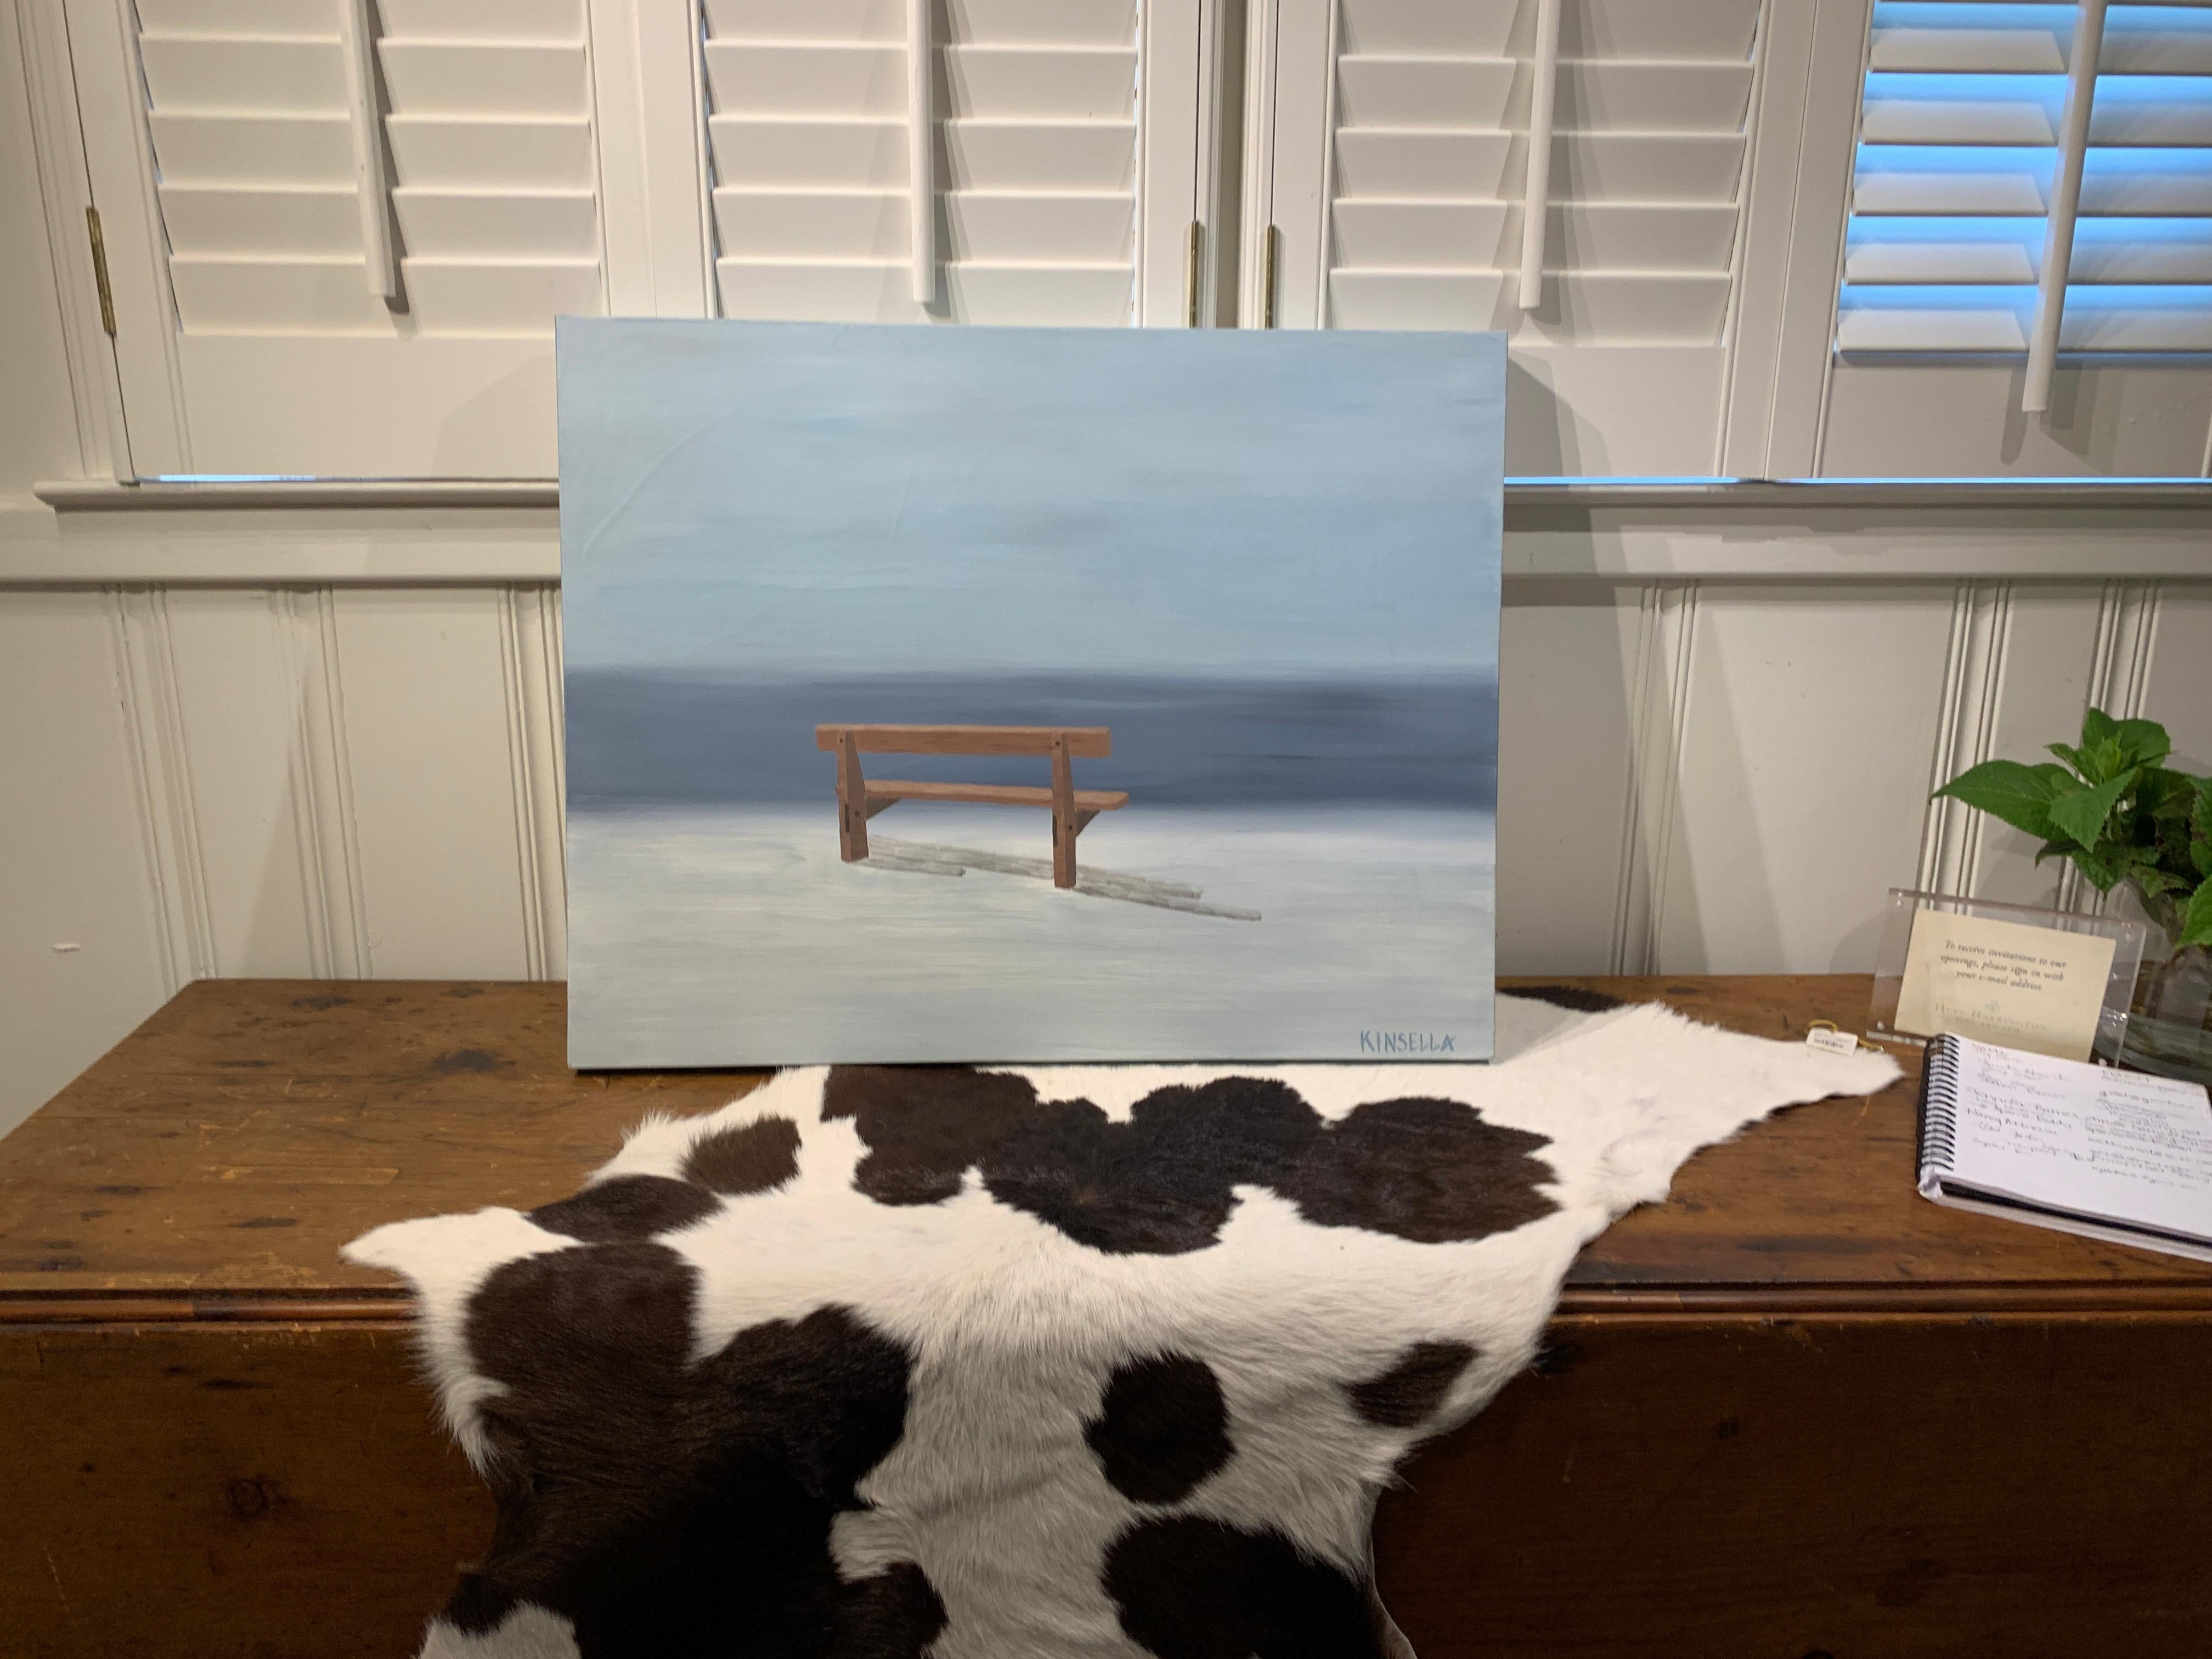 'Still Resting' is a small contemporary acrylic on canvas painting created by American artist Susan Kinsella in 2019. Featuring a palette made of grey and brown tones, the painting depicts a humble bench overlooking the sea. We are immediately